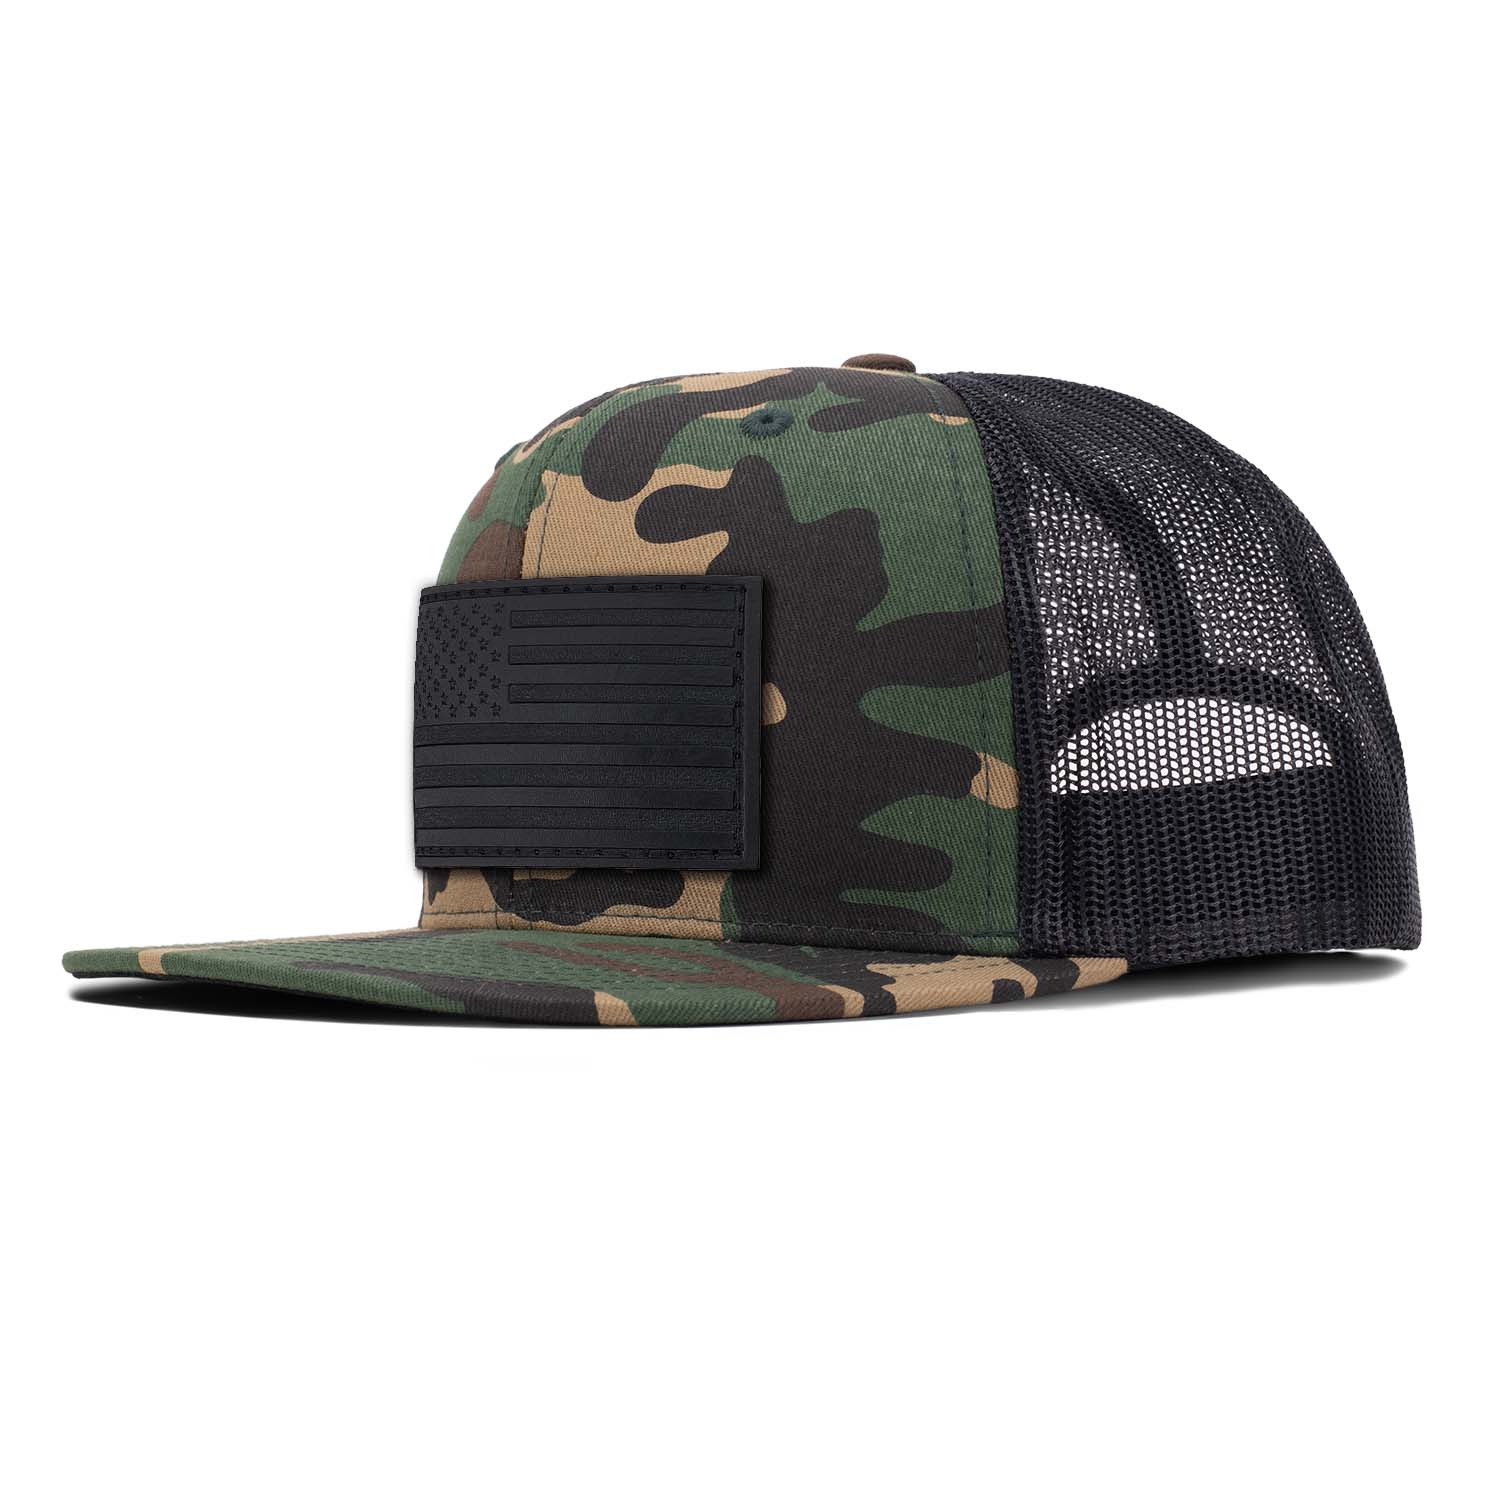 Revolution Mfg woodland camo with black mesh flat bill trucker with our black full grain leather American Flag patch on the front.